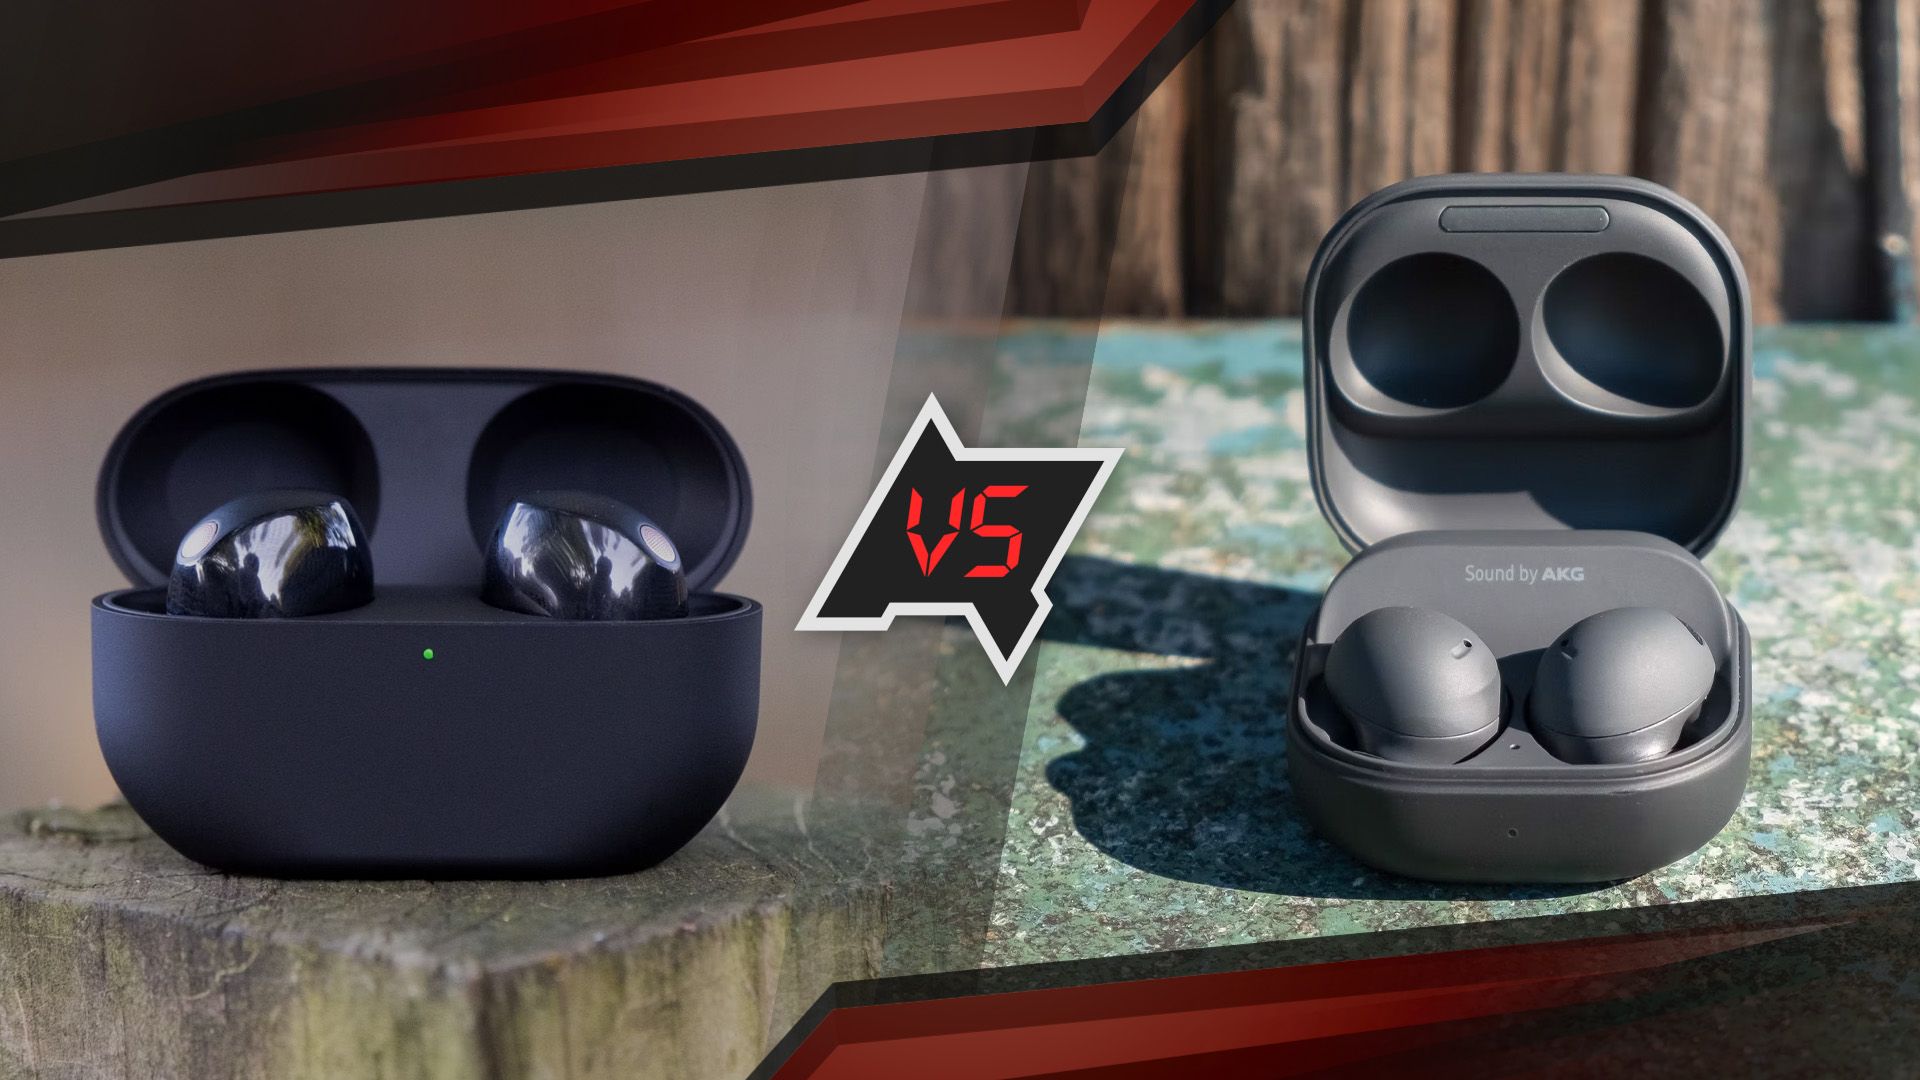 Samsung Galaxy Buds 2 Pro take the fight to Sony to be the king of ANC